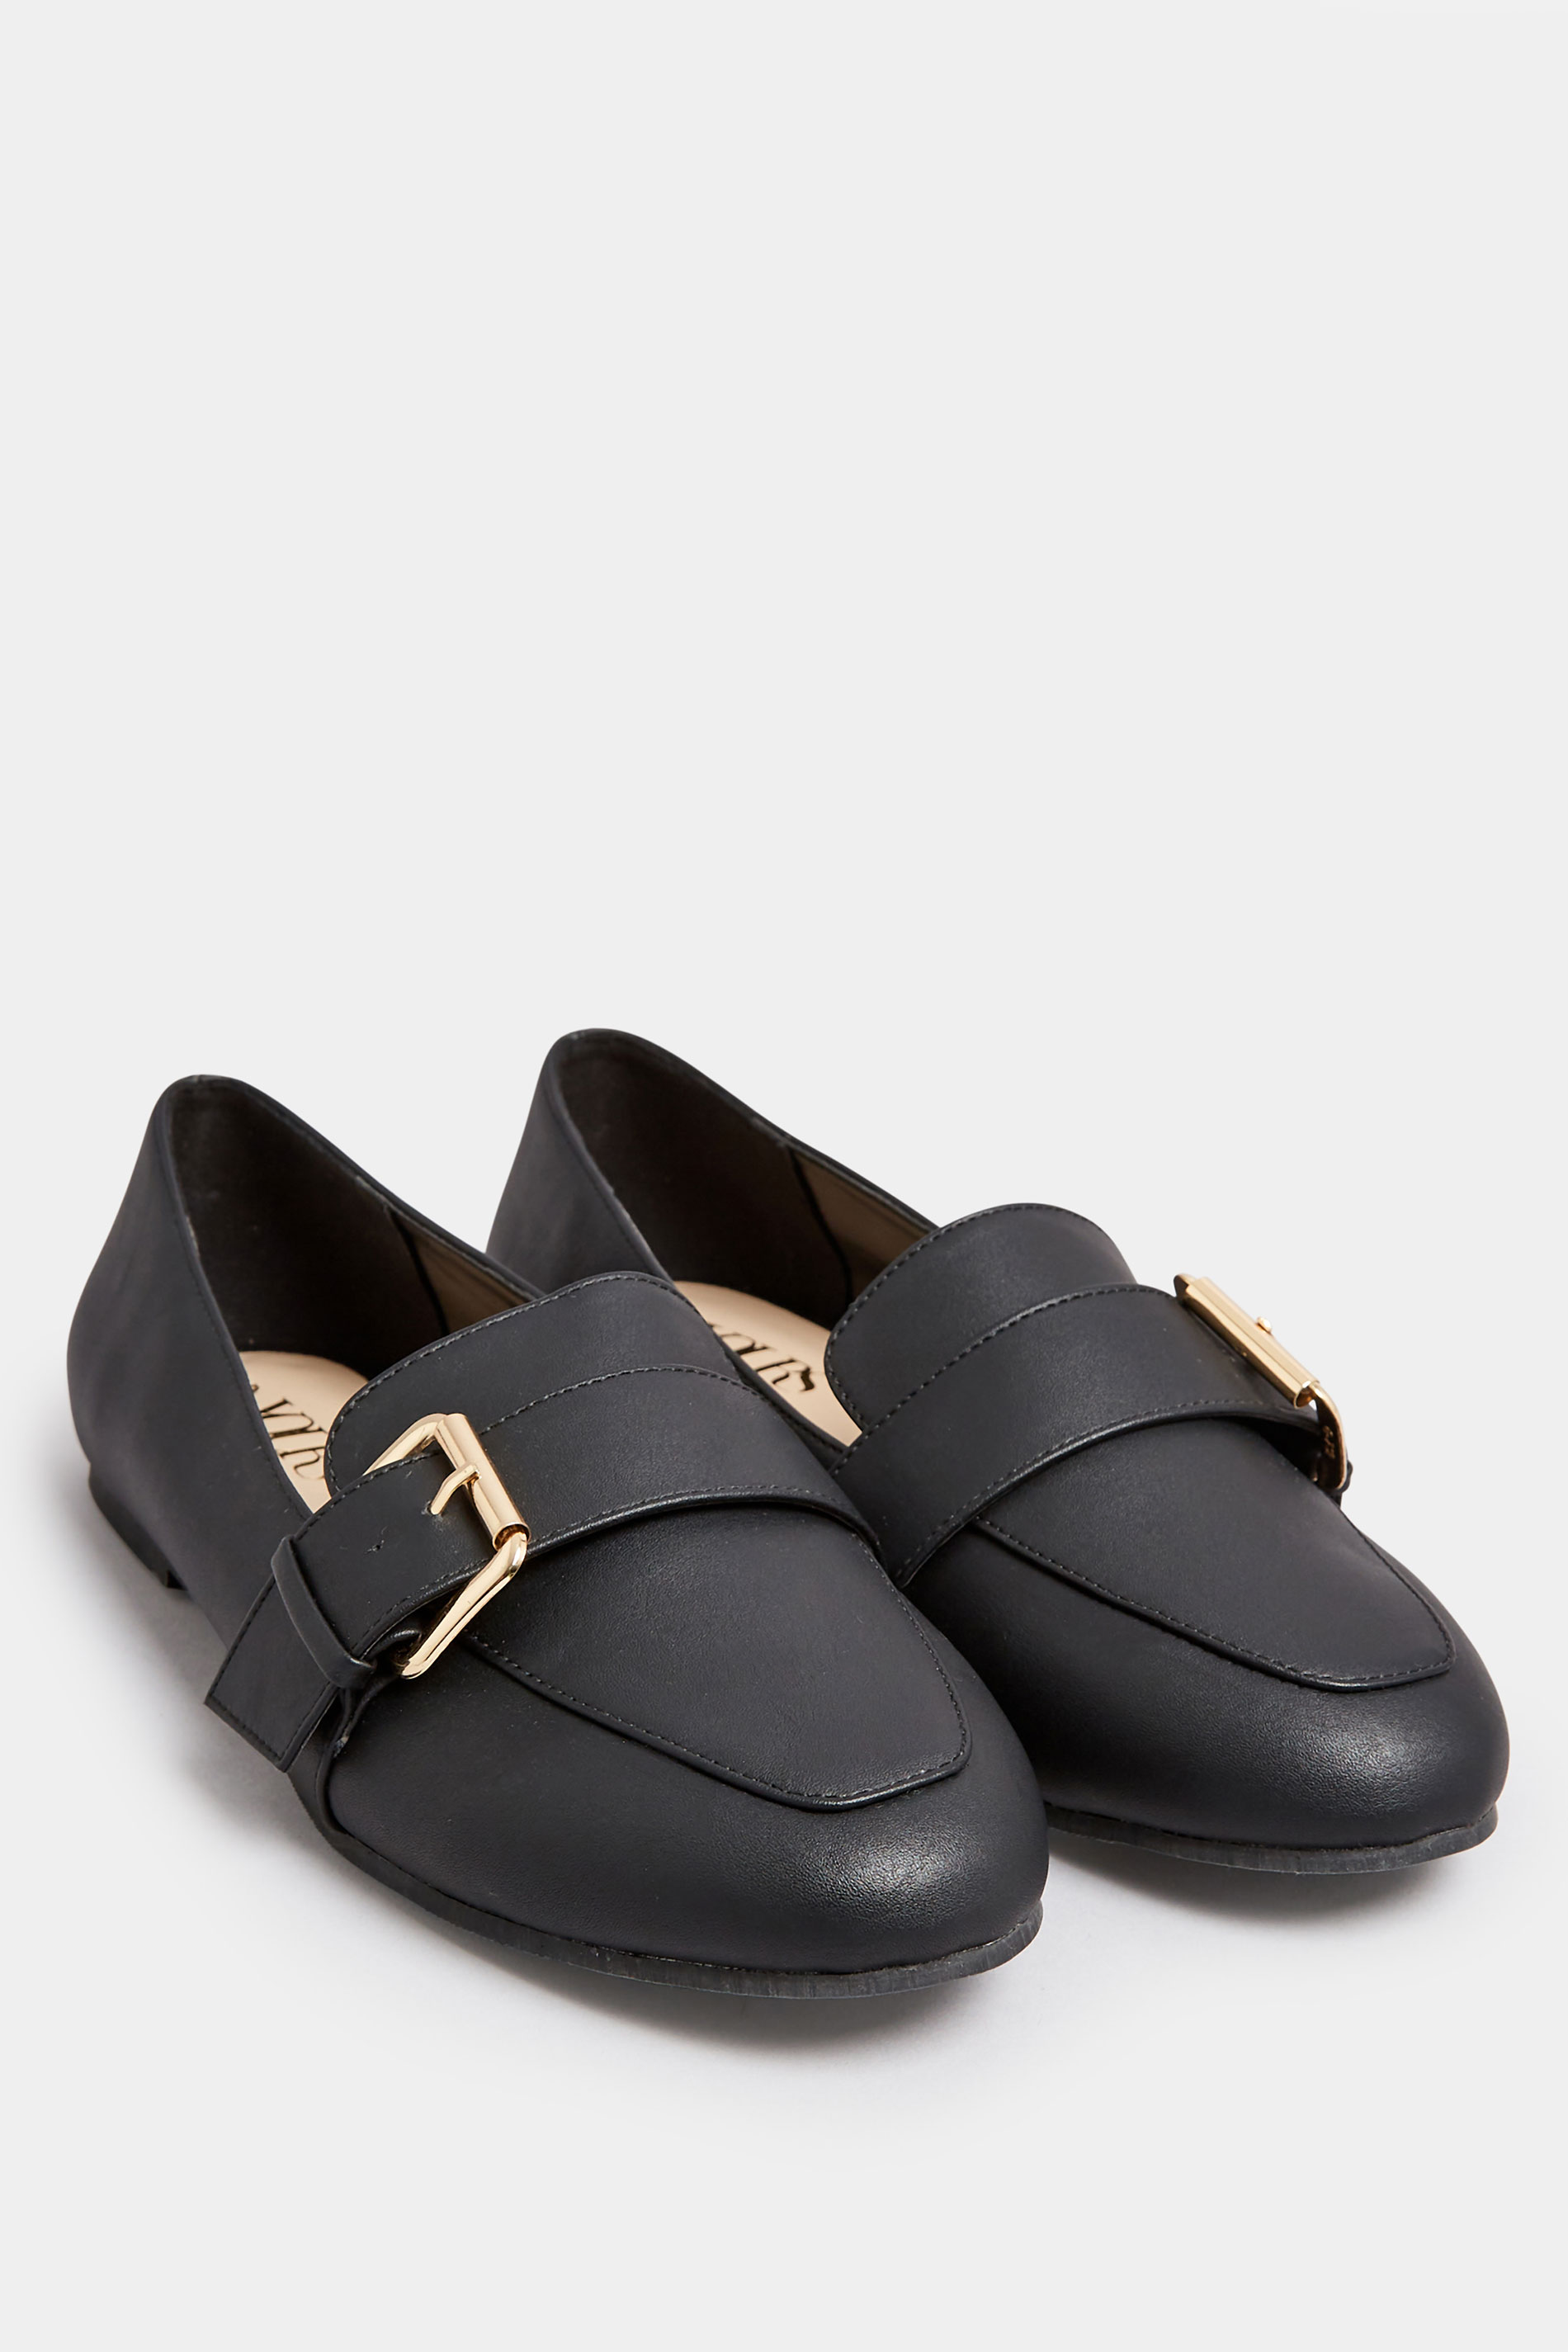 Black Buckle Faux Leather Loafers In Wide E Fit & Extra Wide EEE Fit | Yours Clothing  2